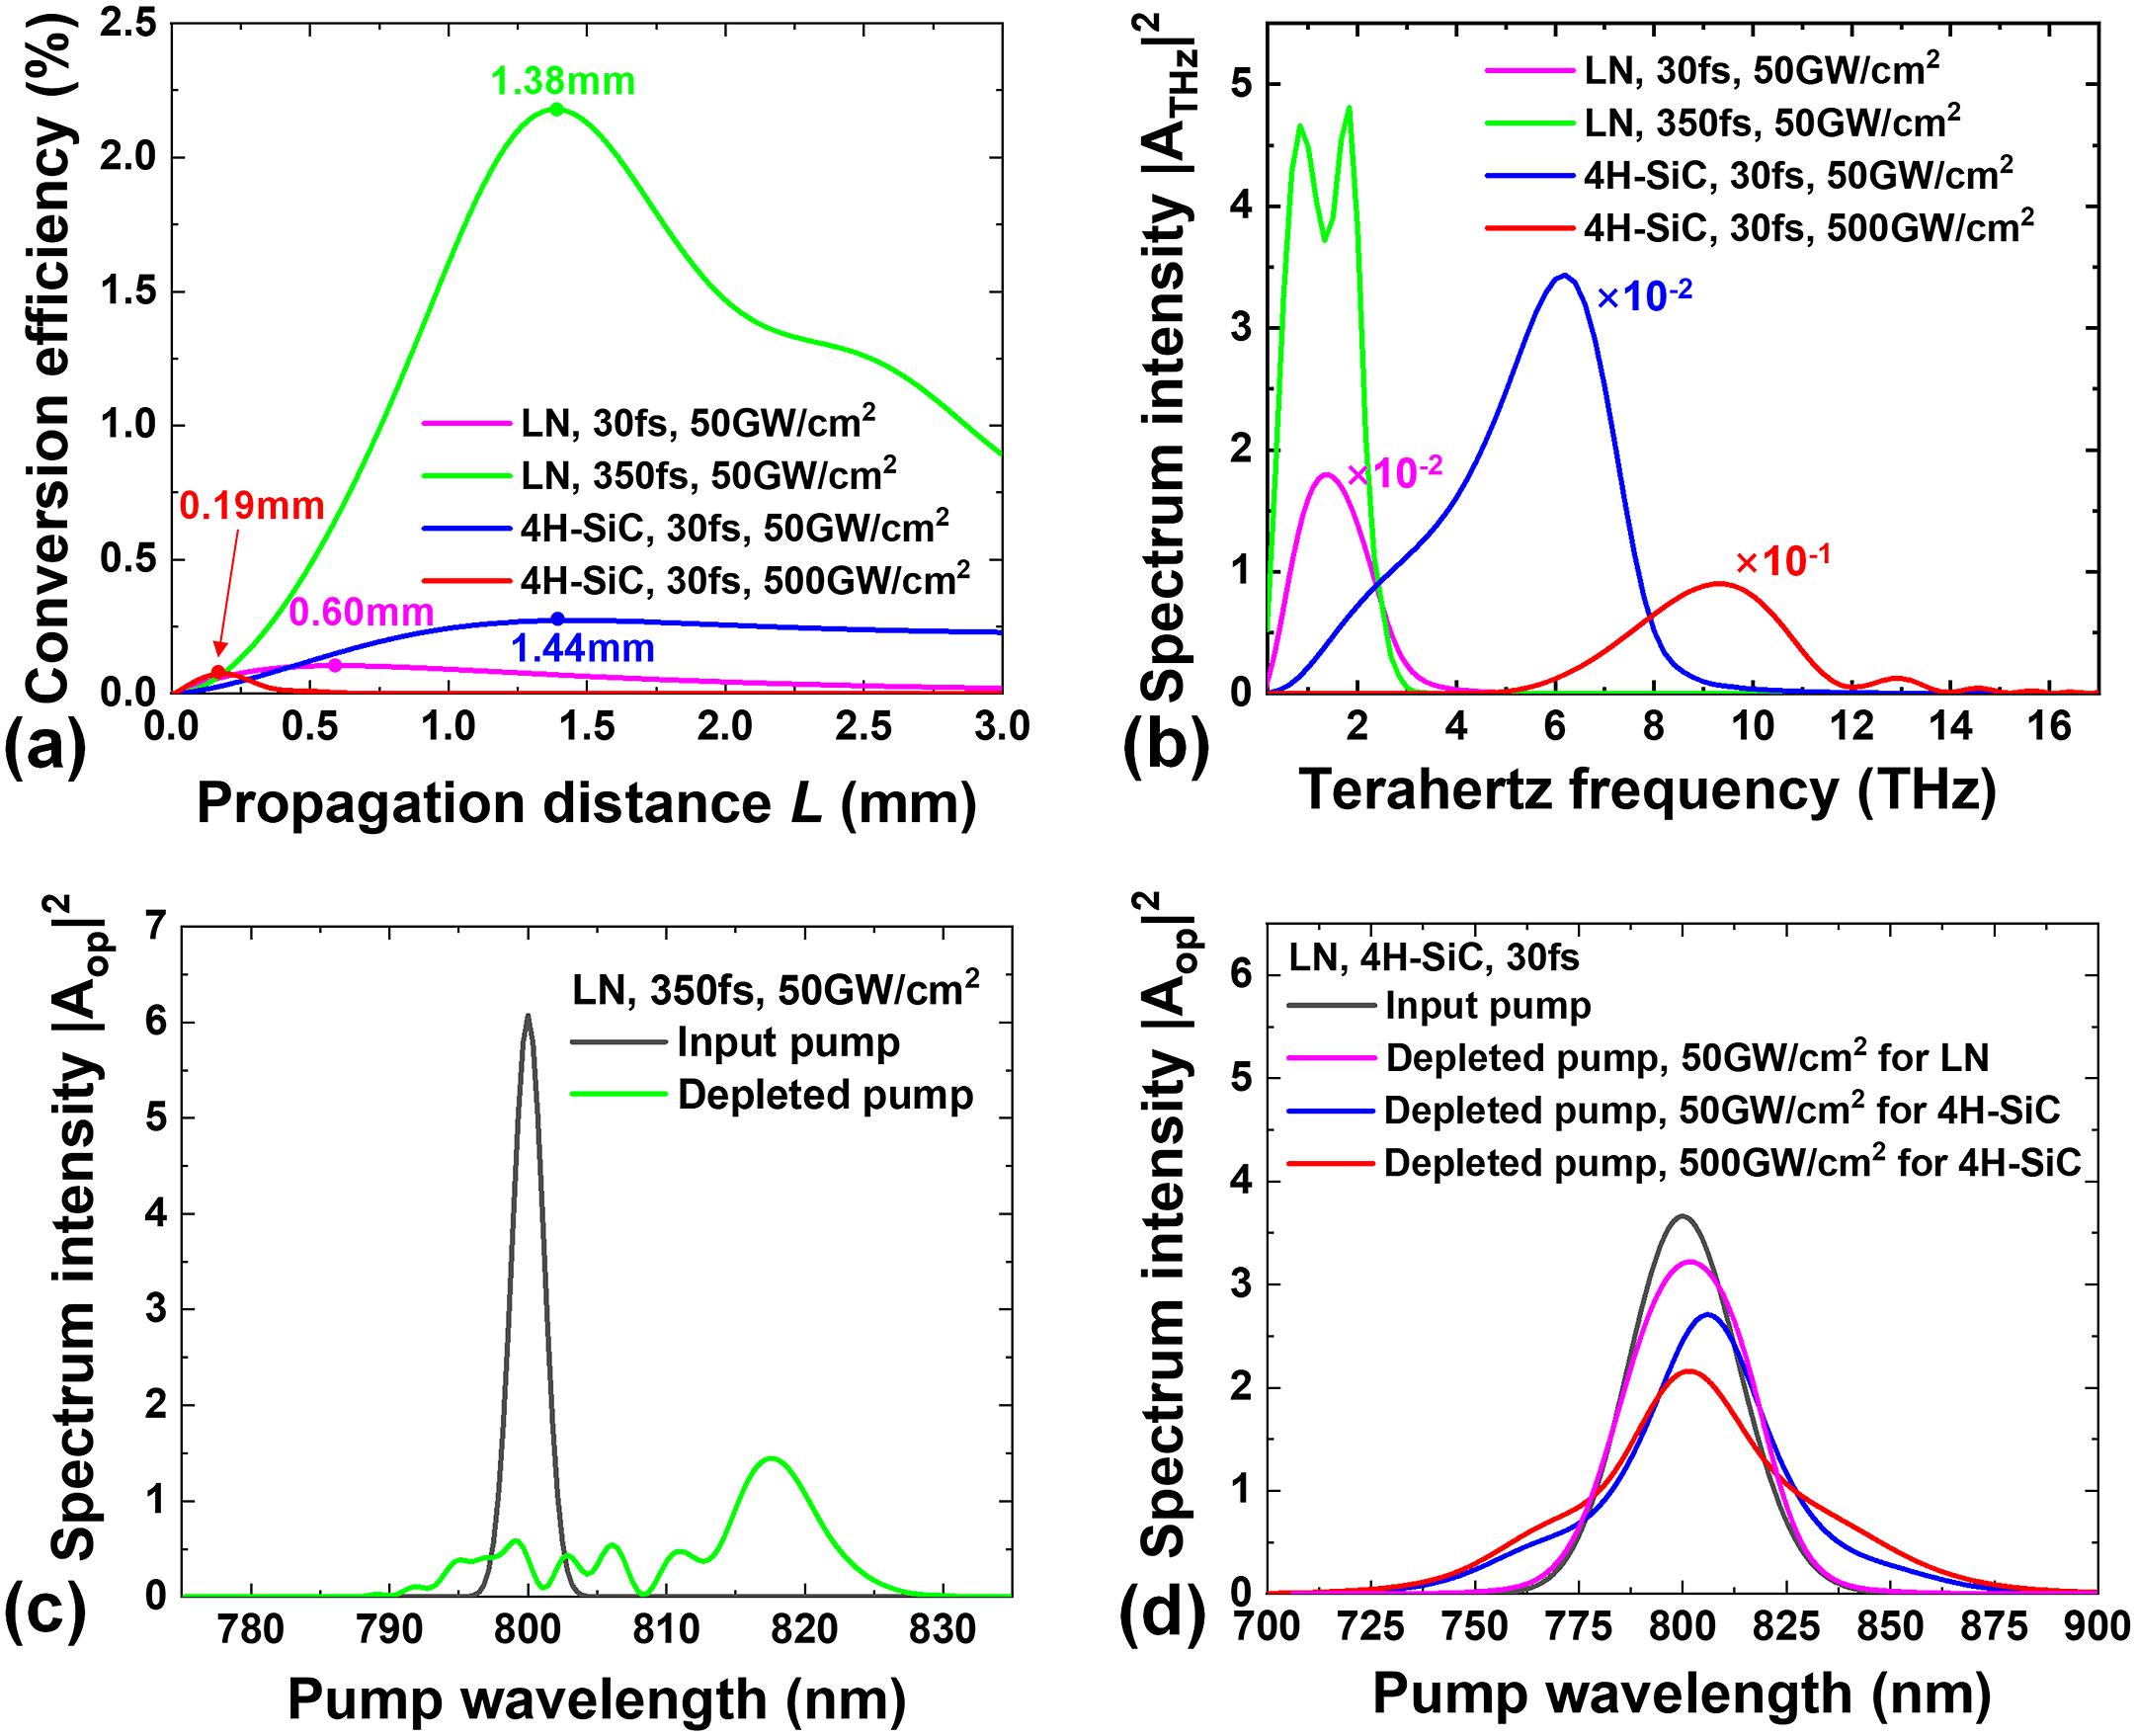 Comparison of terahertz output and pump evolution in LiNbO3 and 4H-SiC crystals without pre-chirping. (a) Conversion efficiencies of terahertz generation versus propagation distance L along the z direction. (b) Terahertz spectra |ATHz|2 in the linear scale at the optimal L in (a), multiplied by 1, 10–2 and 10–1, respectively. (c), (d) The corresponding pump evolution processes influenced by cascading and SPM effects, including depletion, widening and frequency shift compared with the input pump. In (d), low- and high-intensity input pumps are normalized to distinguish their difference more clearly.